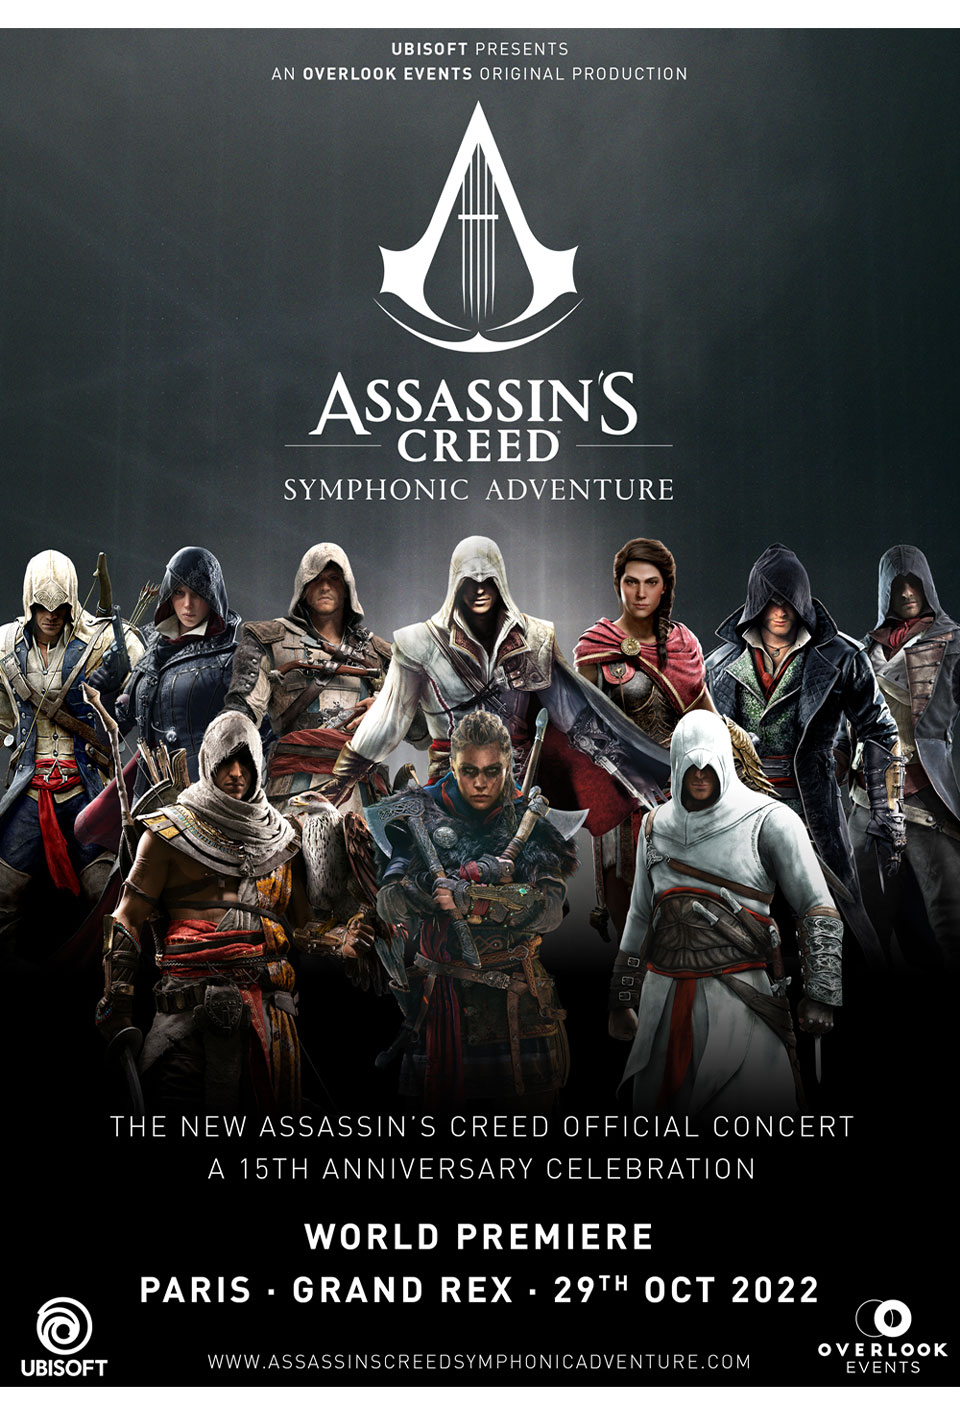 Assassin’s Creed Symphonic Adventure Live Concert Coming In 2022 - Image 1